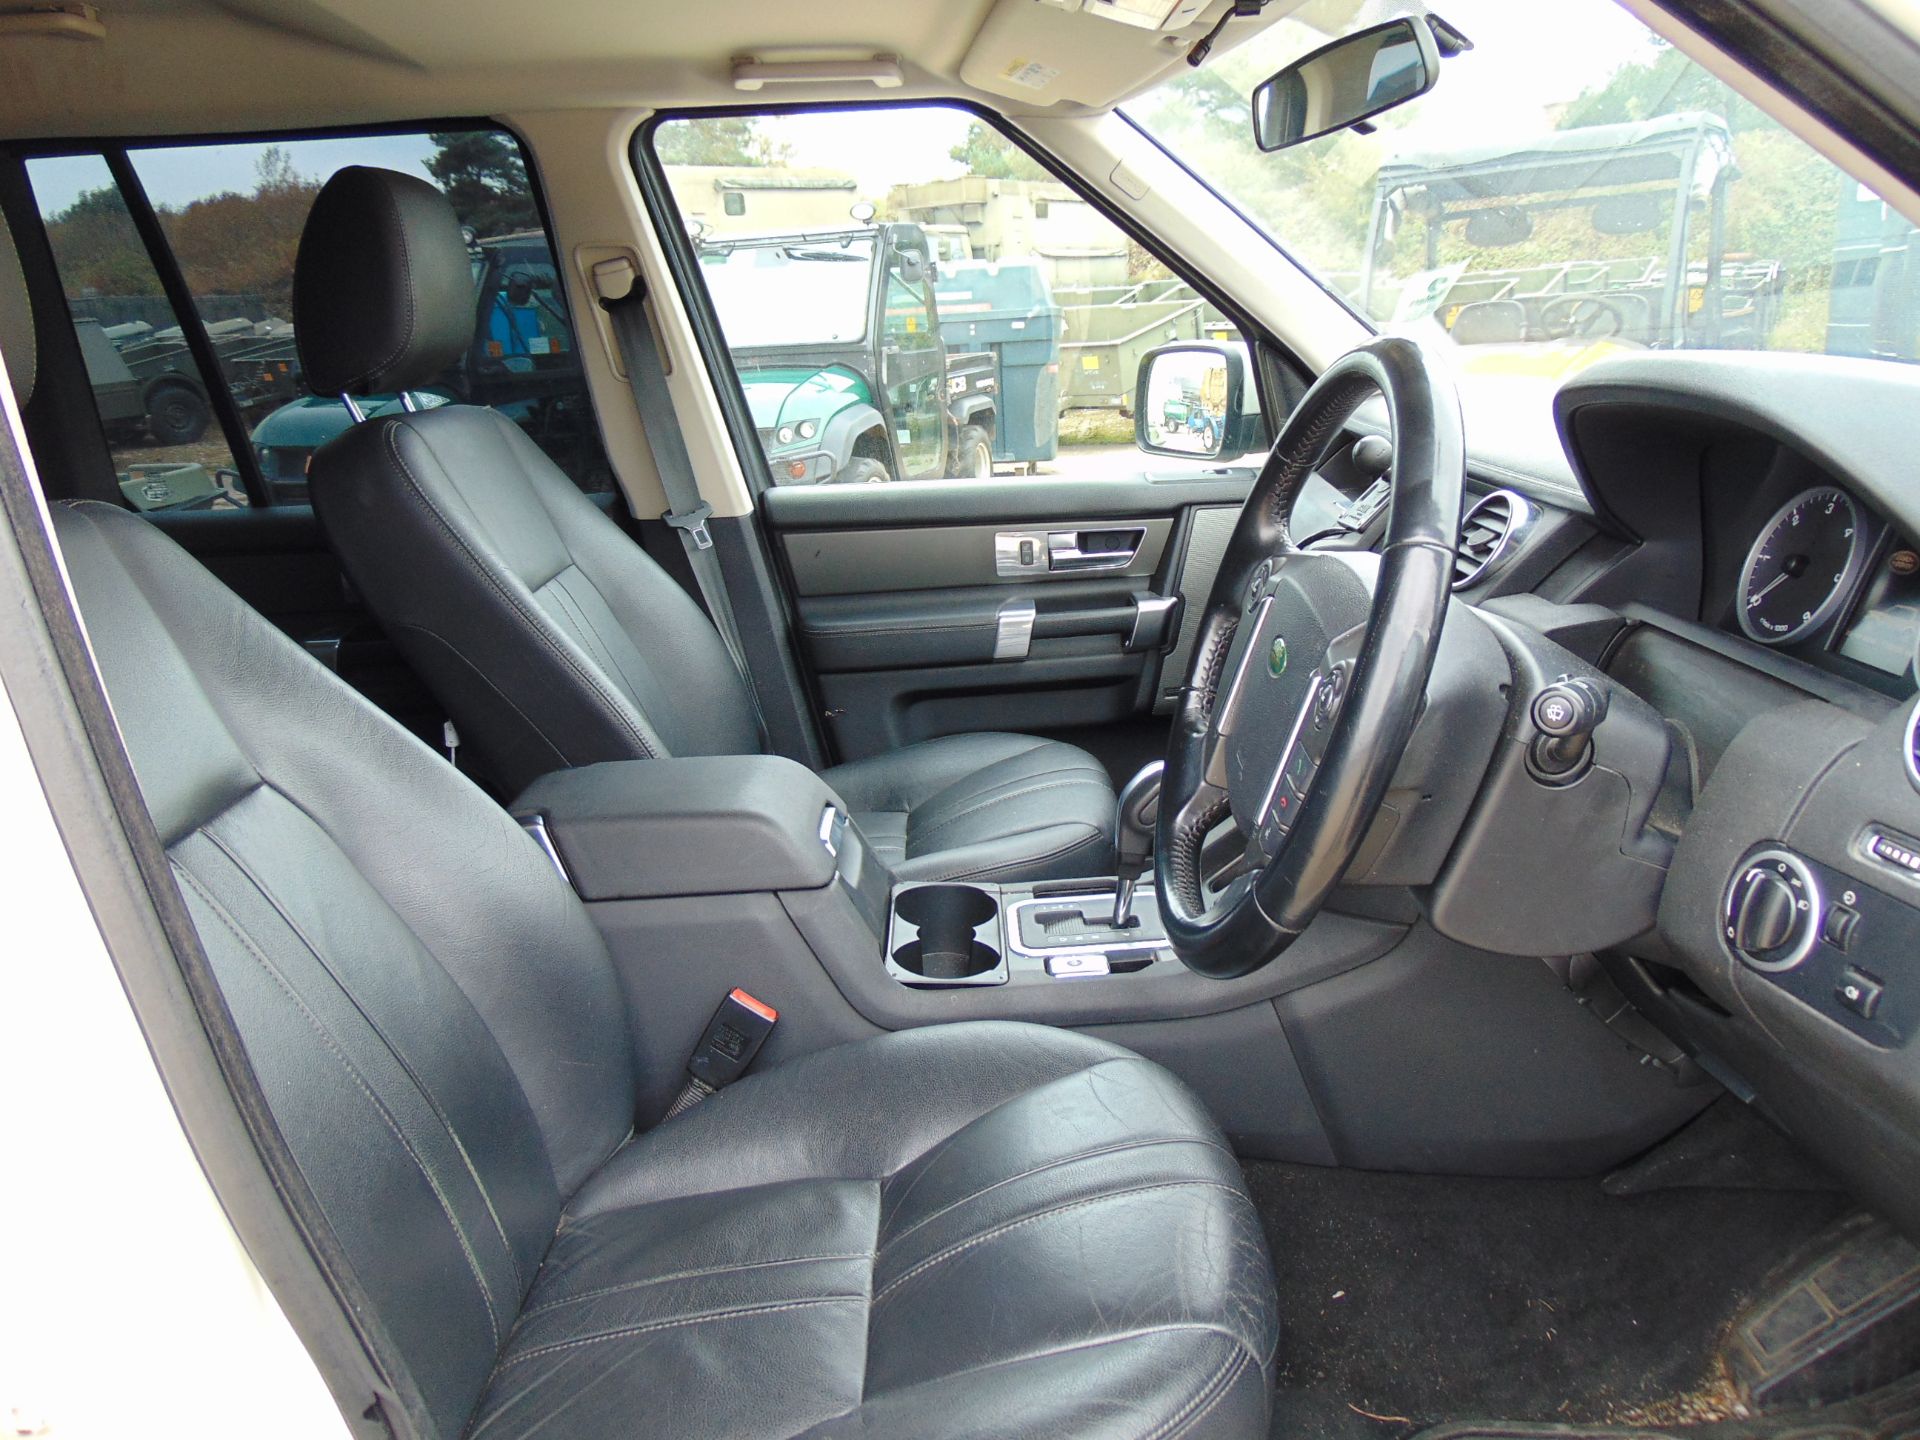 2010 Land Rover Discovery 4 3.0 TDV6 GS - Image 12 of 22